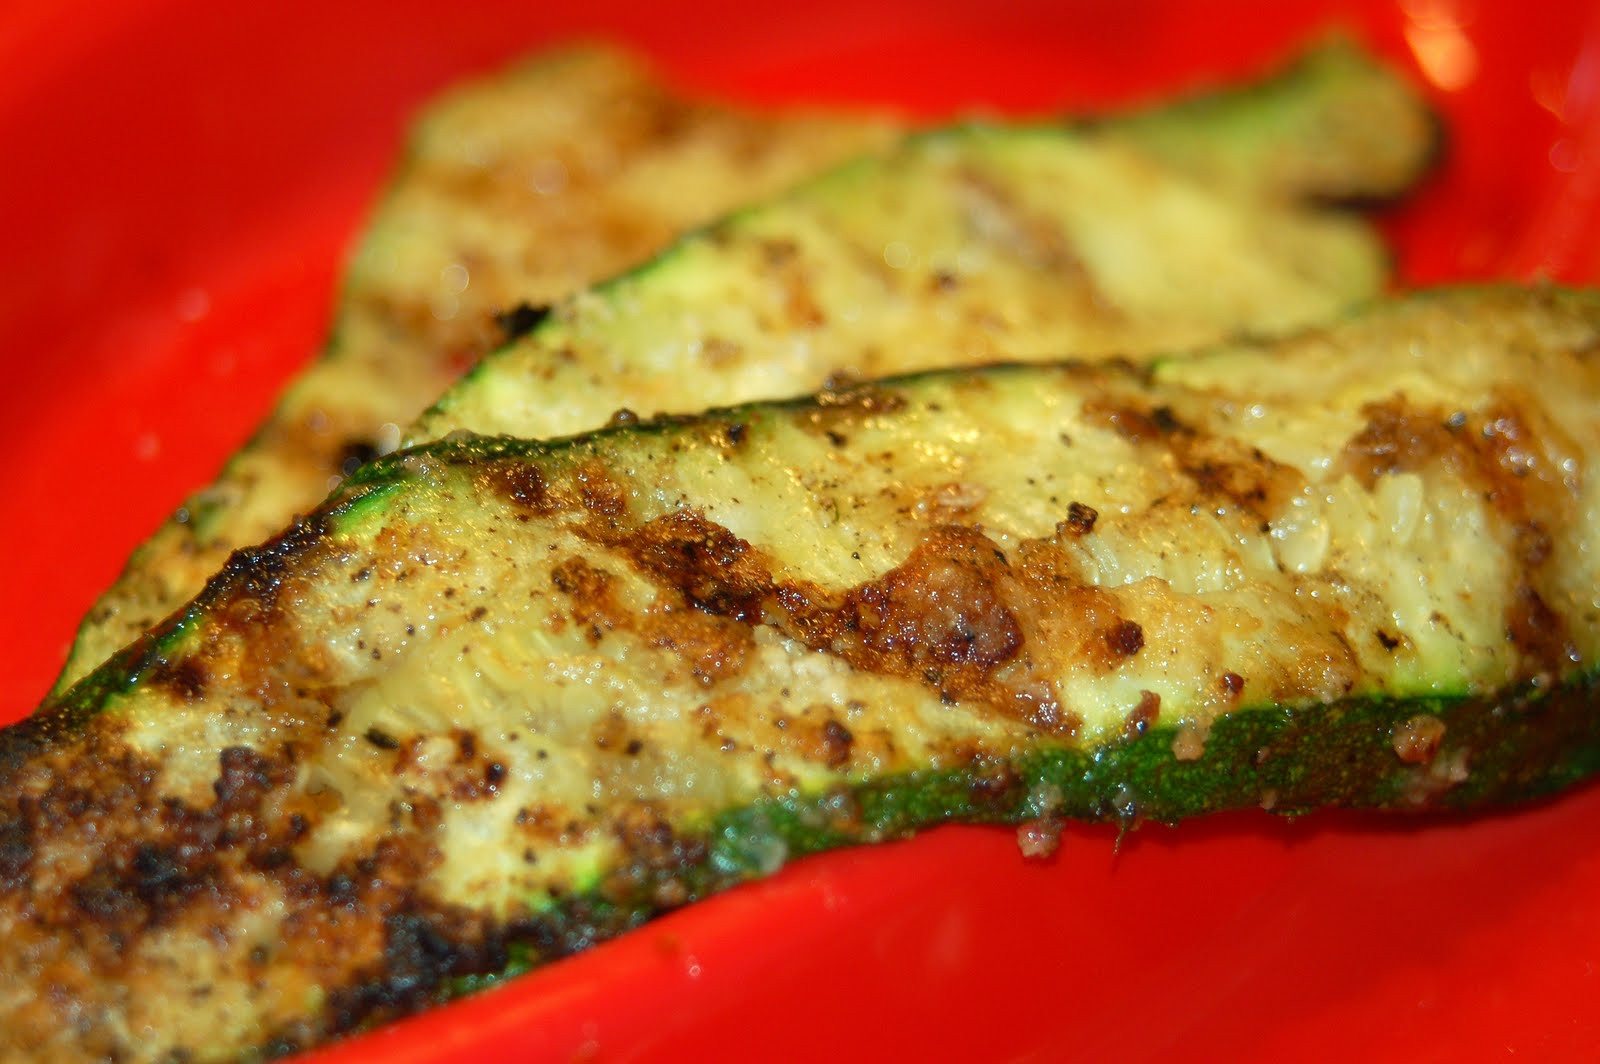 Grilled Zucchini Parmesan Best Of the Serendipity Bistro Grilled Zucchini Parmesan